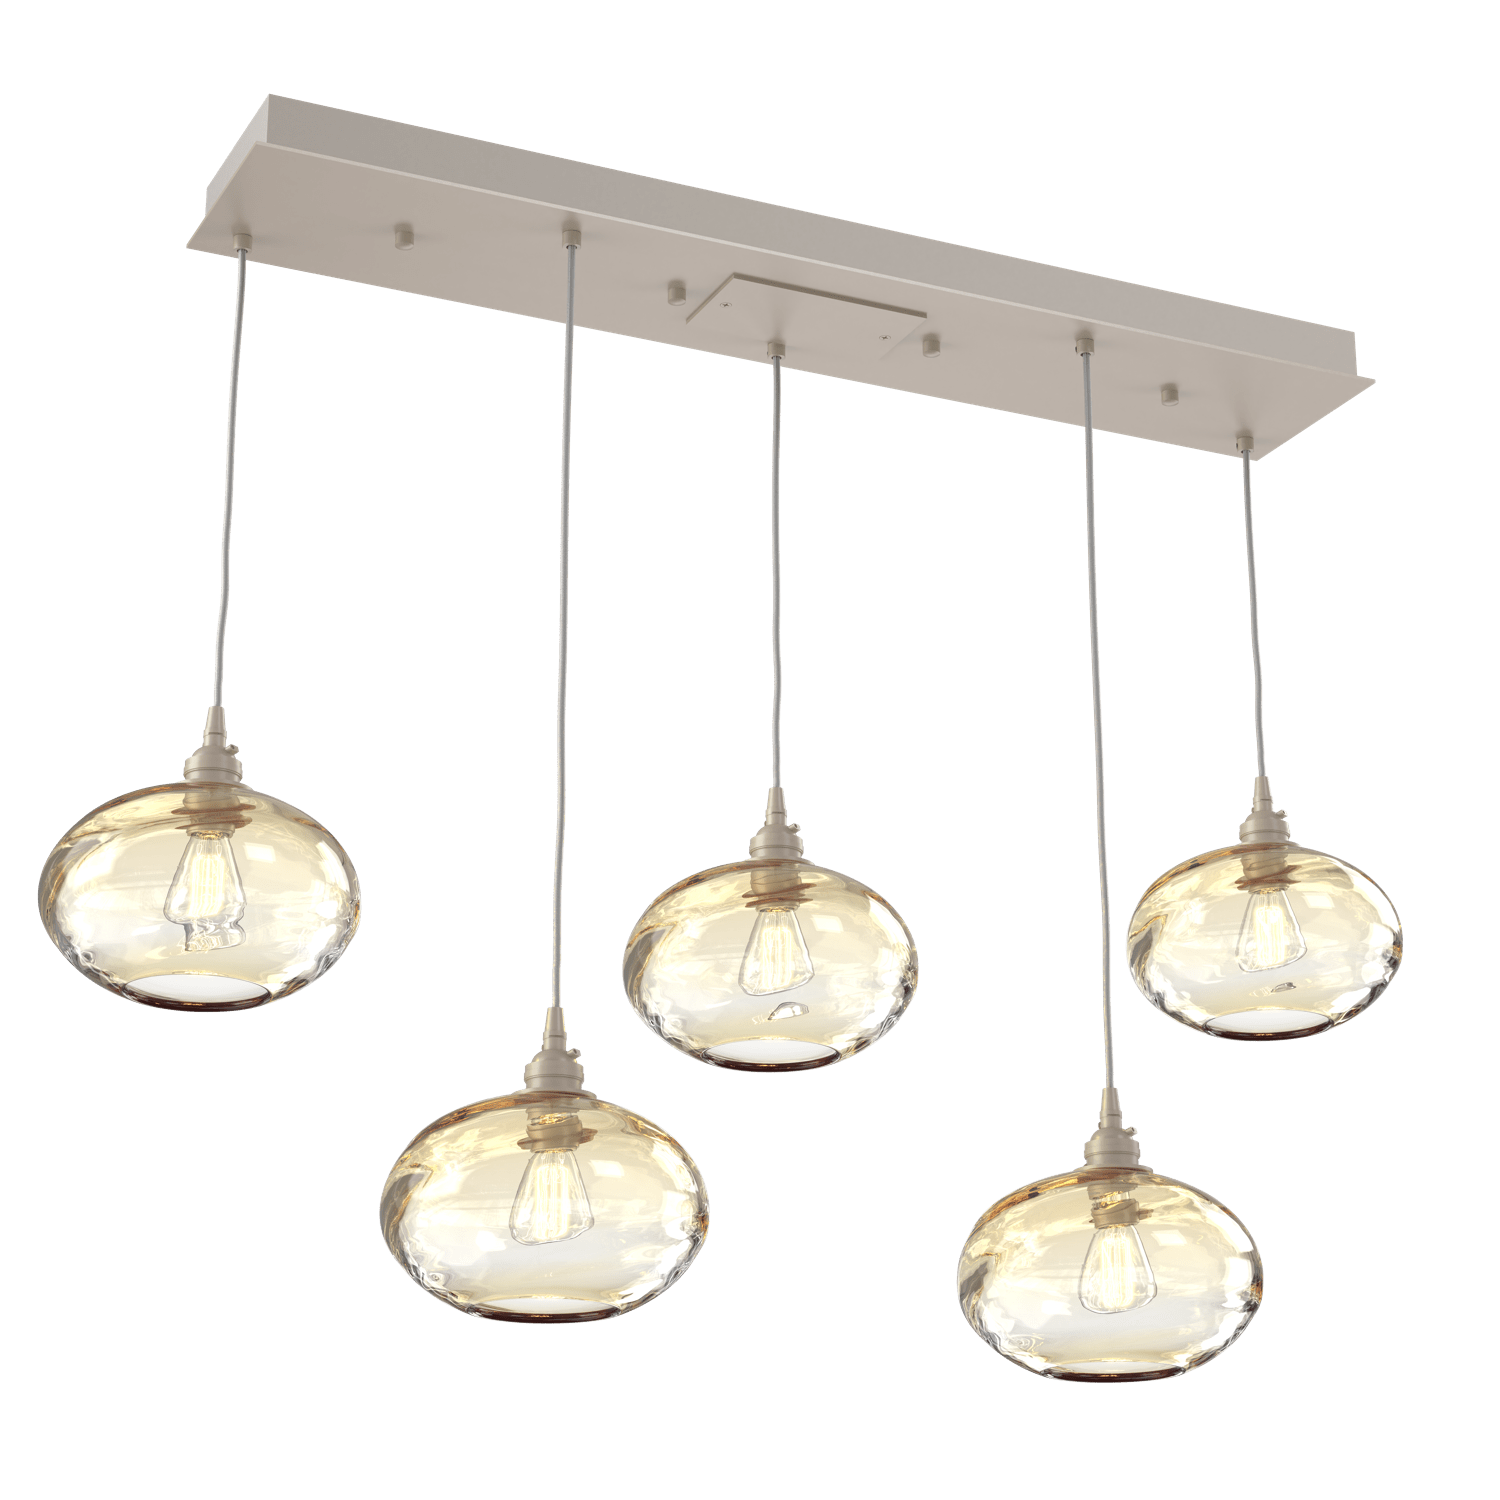 PLB0036-05-BS-OA-Hammerton-Studio-Optic-Blown-Glass-Coppa-5-light-linear-pendant-chandelier-with-metallic-beige-silver-finish-and-optic-amber-blown-glass-shades-and-incandescent-lamping